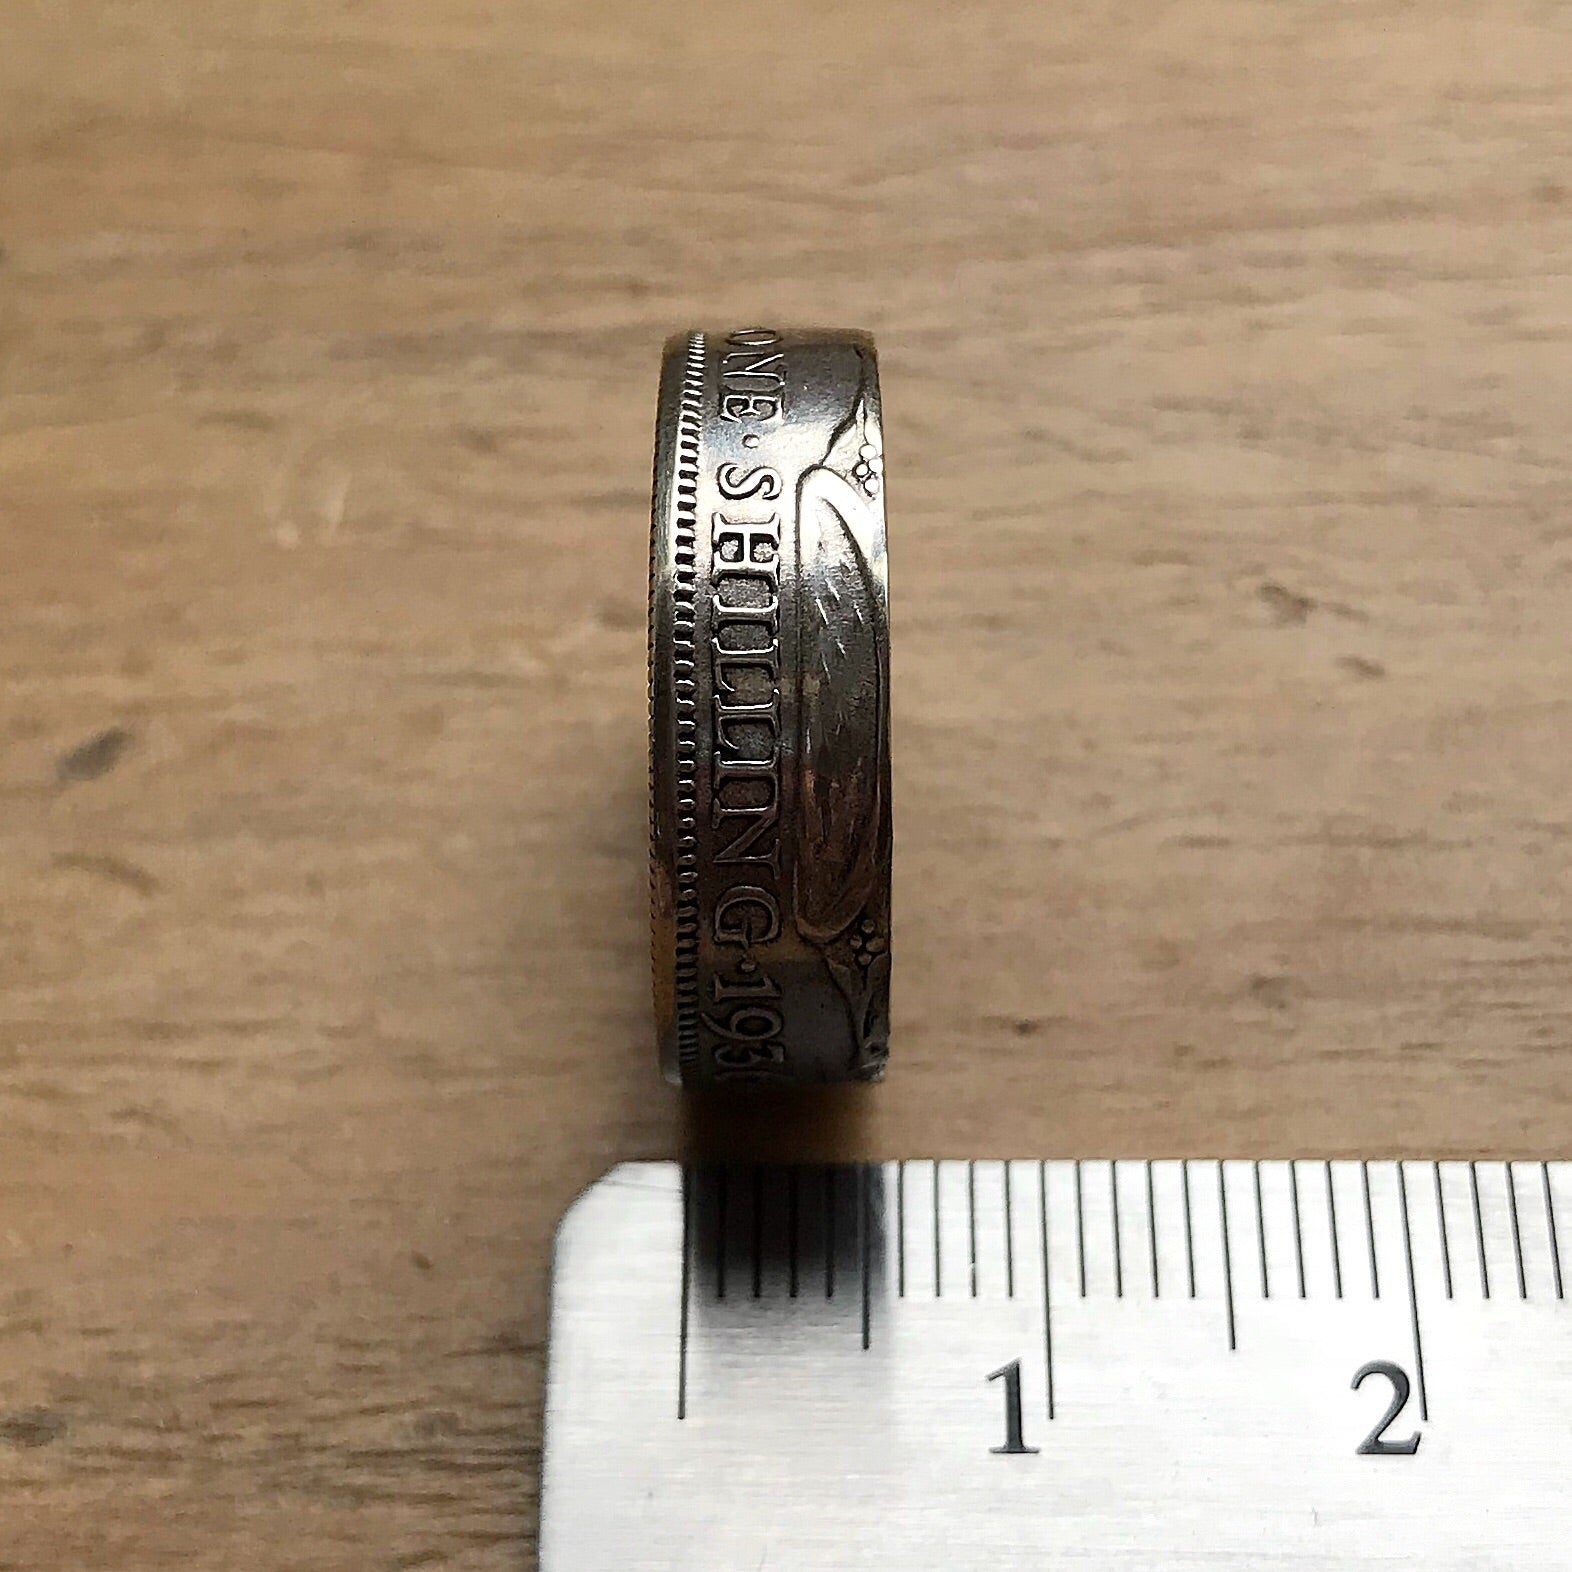 One Shilling Coin Ring - Made to Order - Silver Plated - Shwen Design Uk